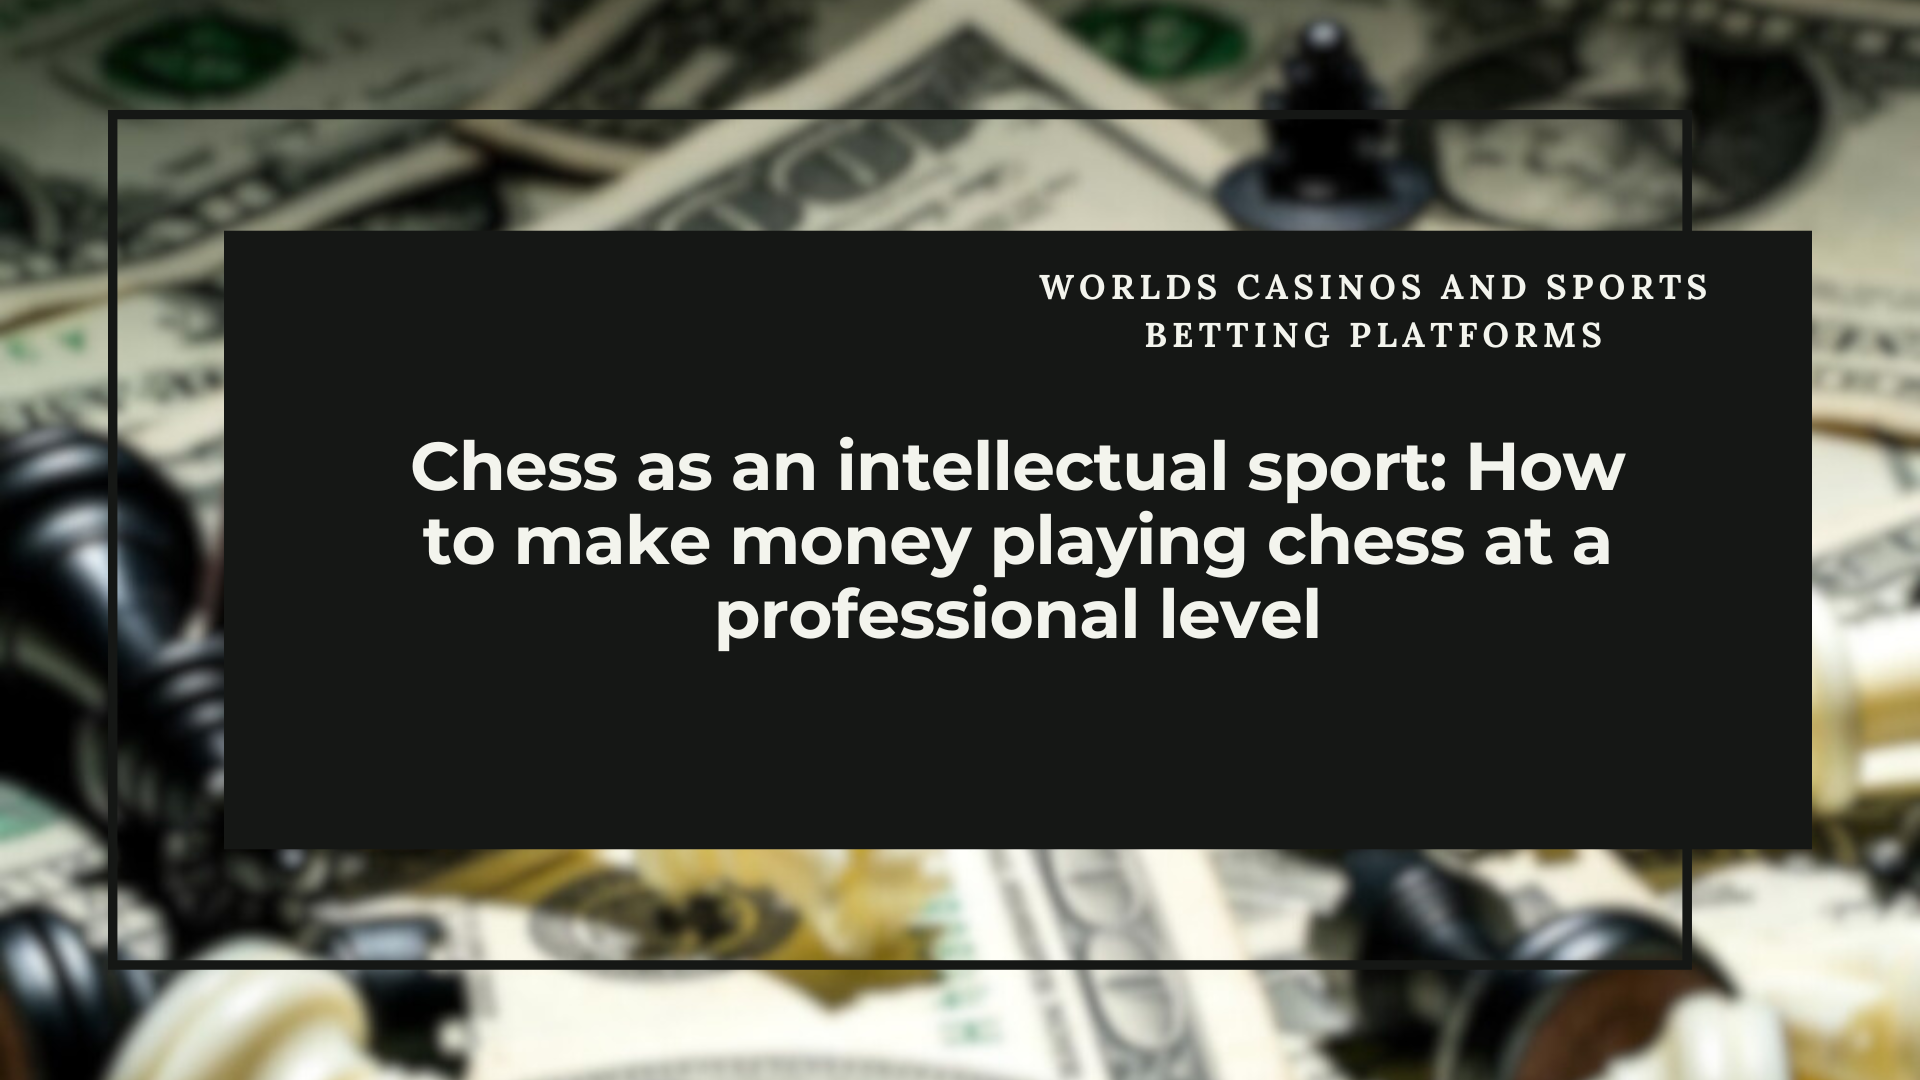 Chess as an intellectual sport: How to make money playing chess at a professional level